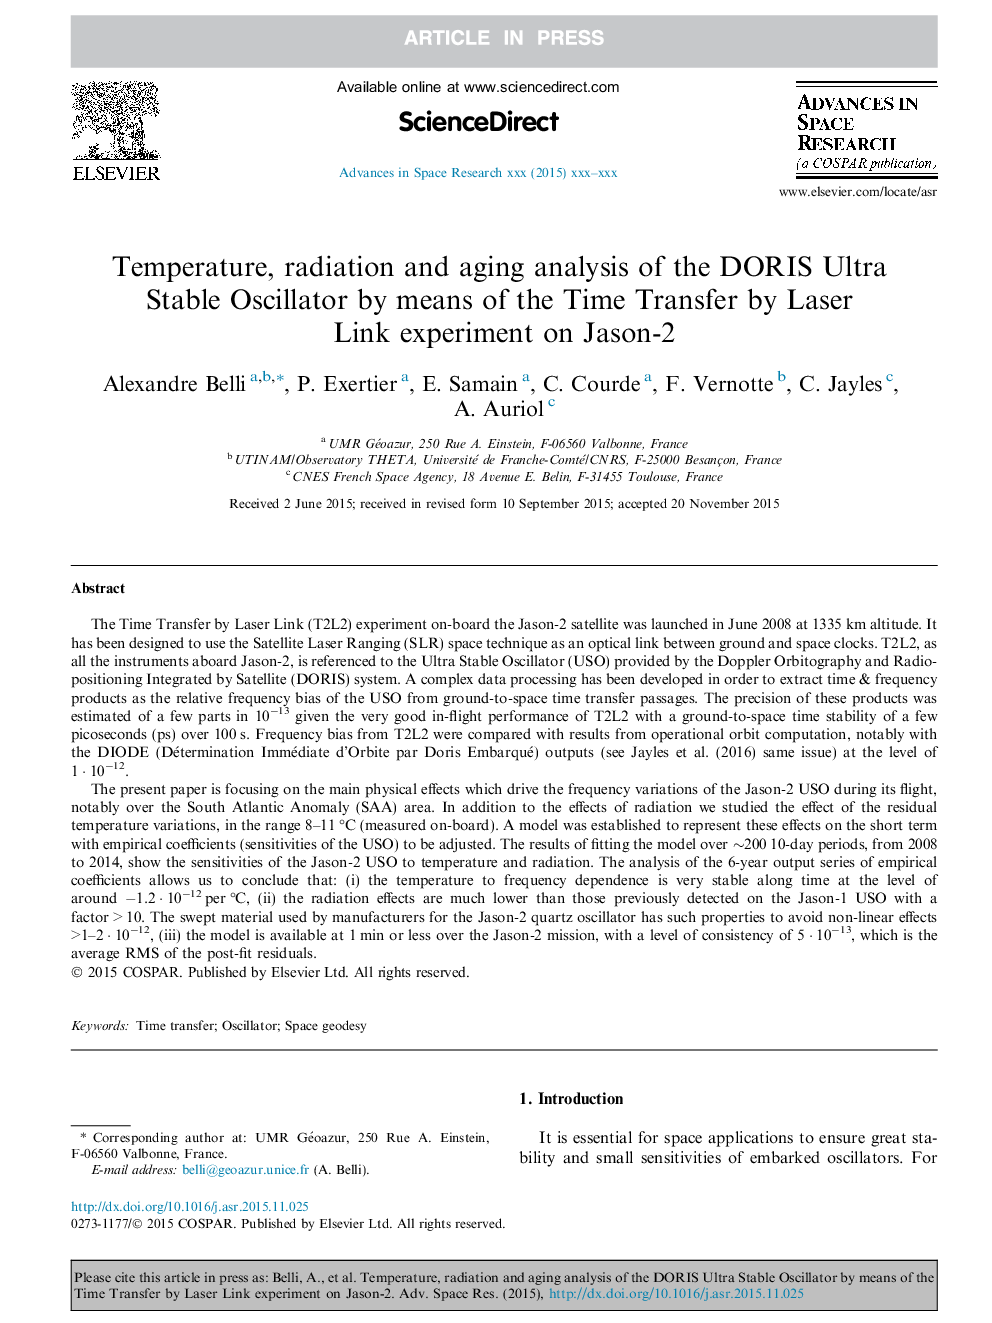 Temperature, radiation and aging analysis of the DORIS Ultra Stable Oscillator by means of the Time Transfer by Laser Link experiment on Jason-2